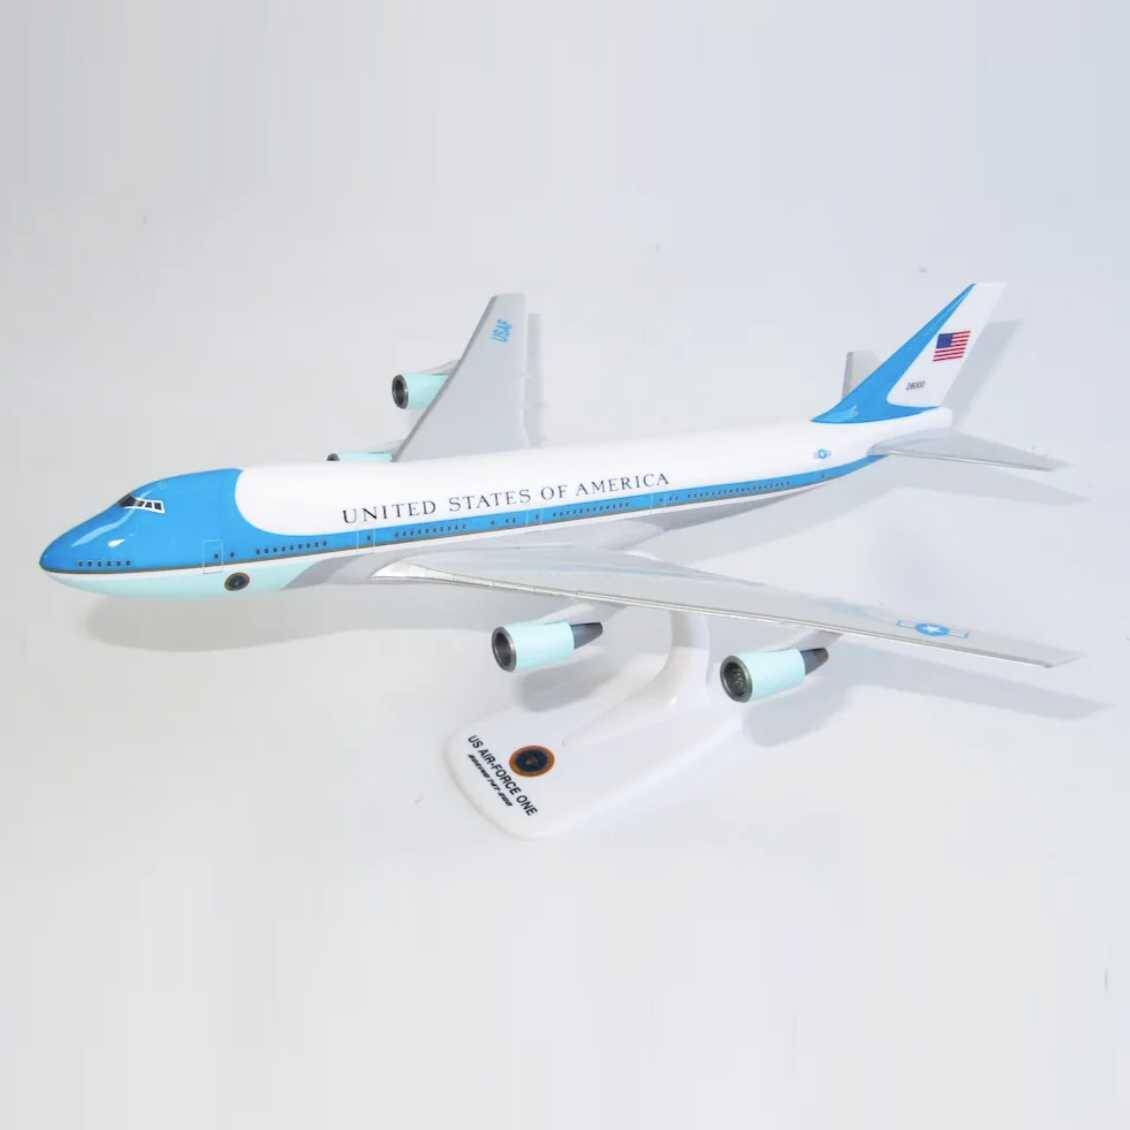 MODEL 1/250 BOEING 747 AIR FORCE ONE